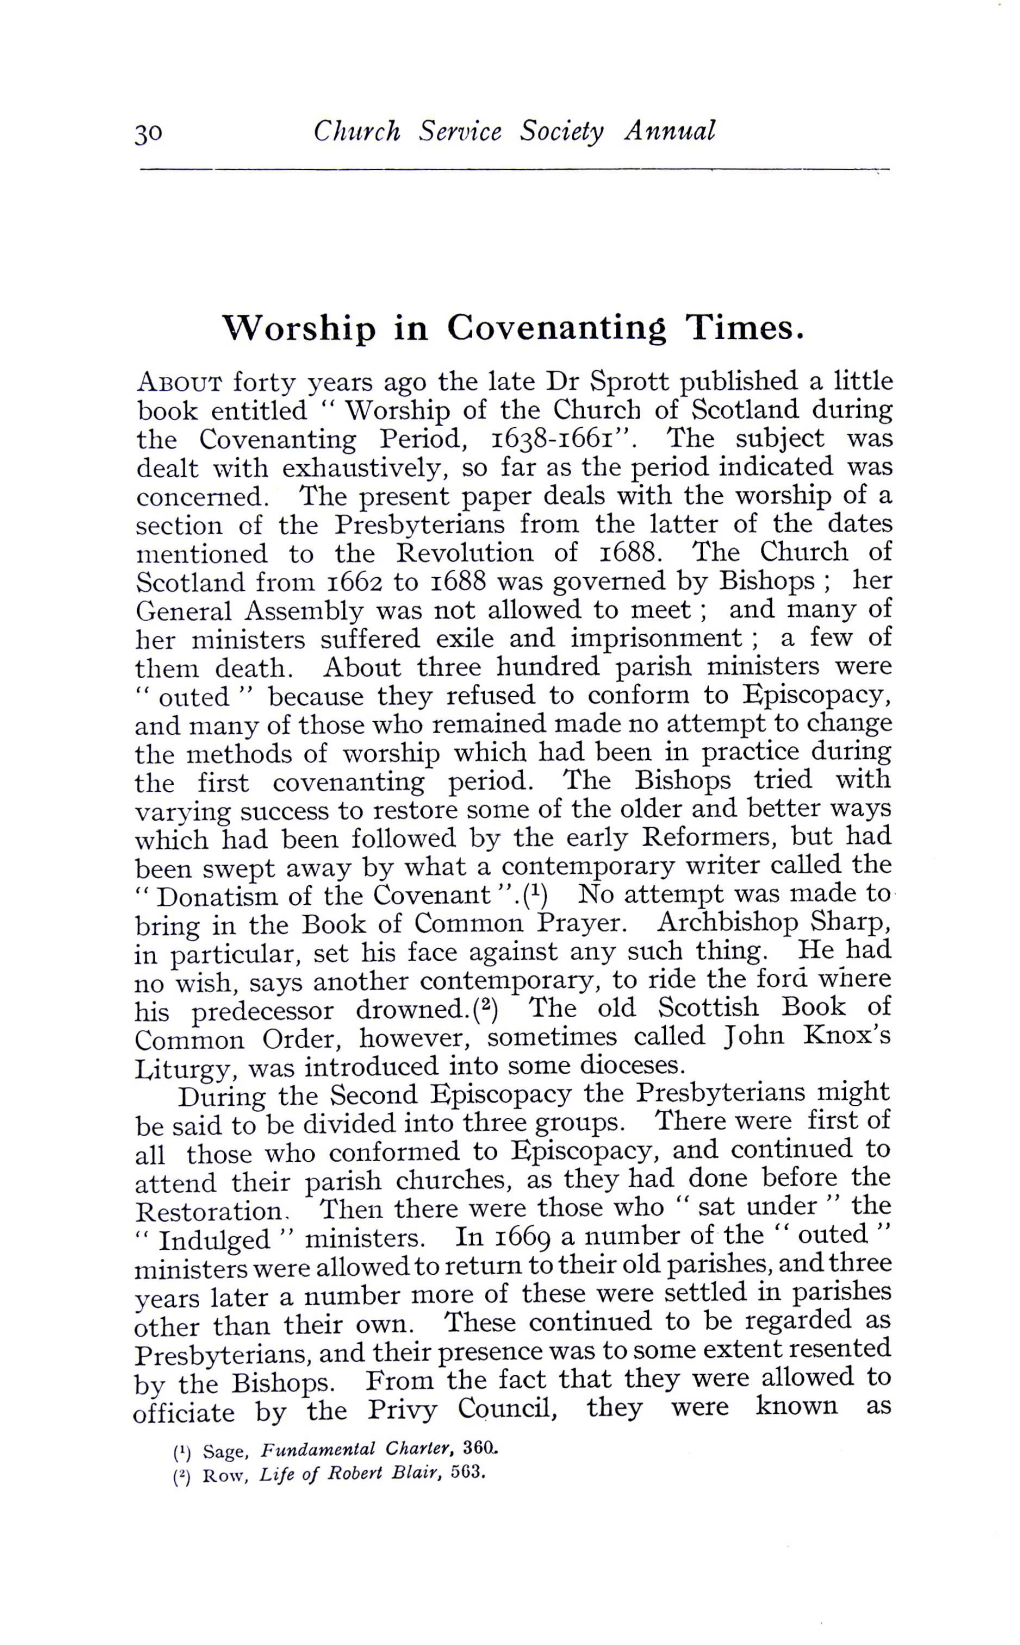 Worship in Covenanting Times